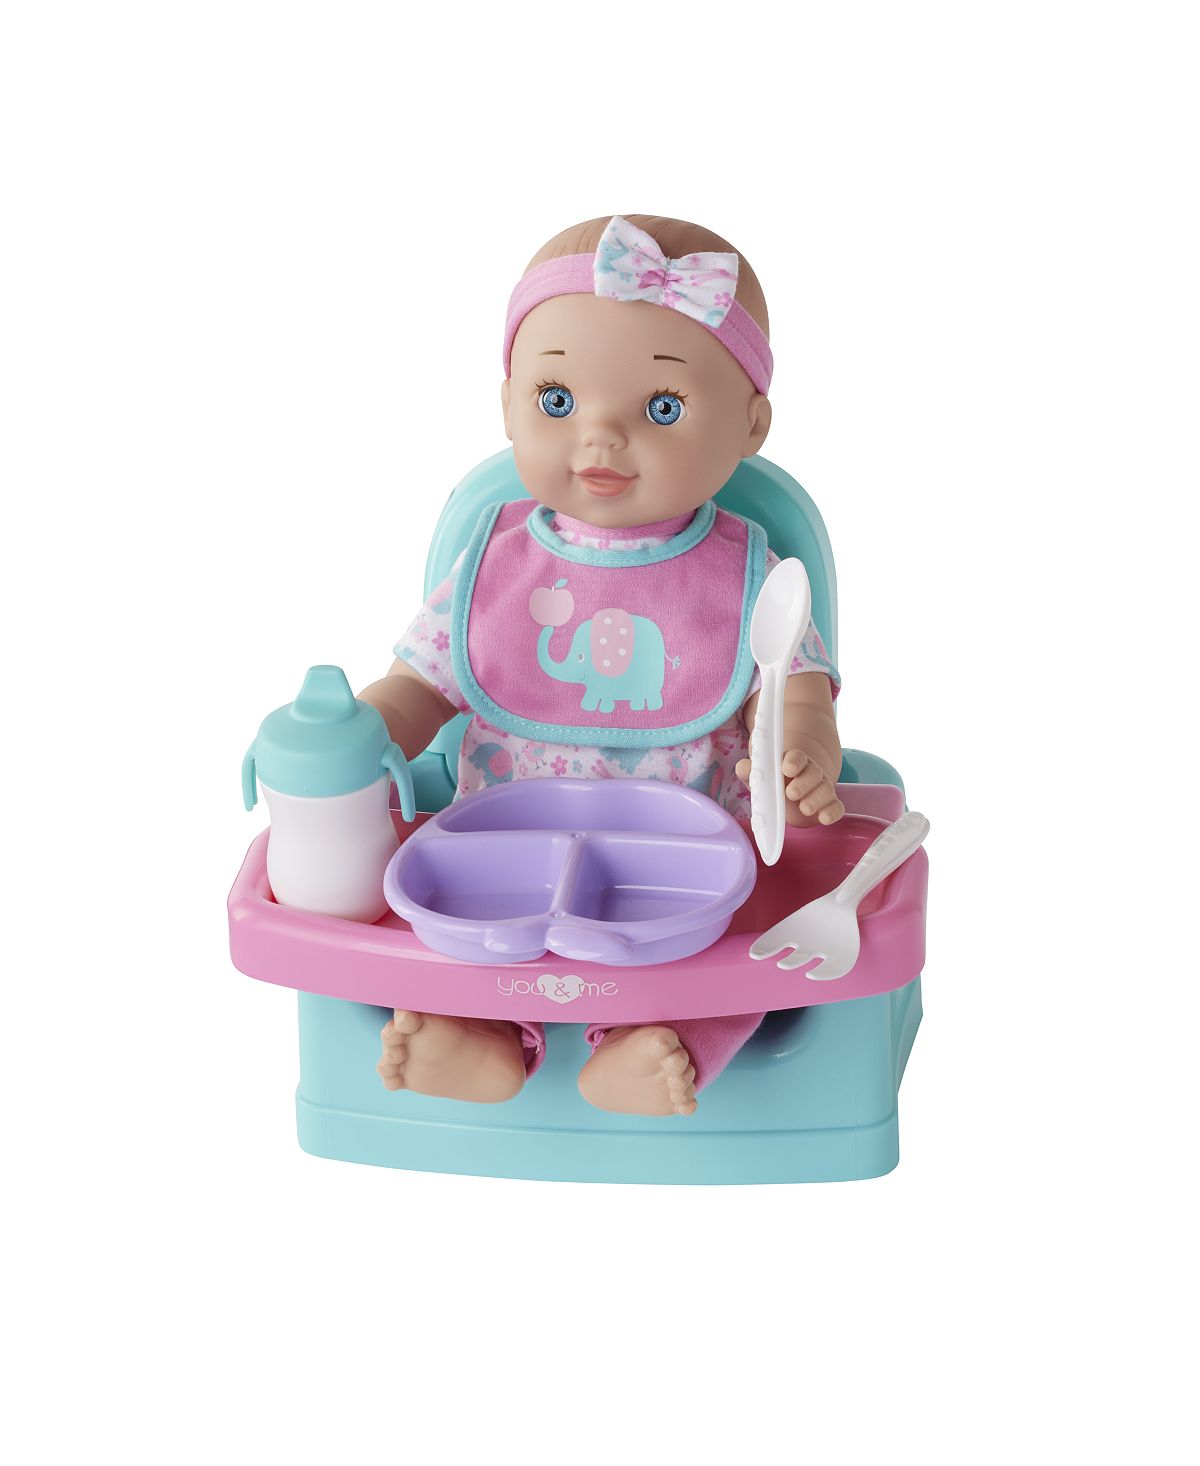 Toys R Us - Hungry Baby 14" Doll Set with Feeding Accessories